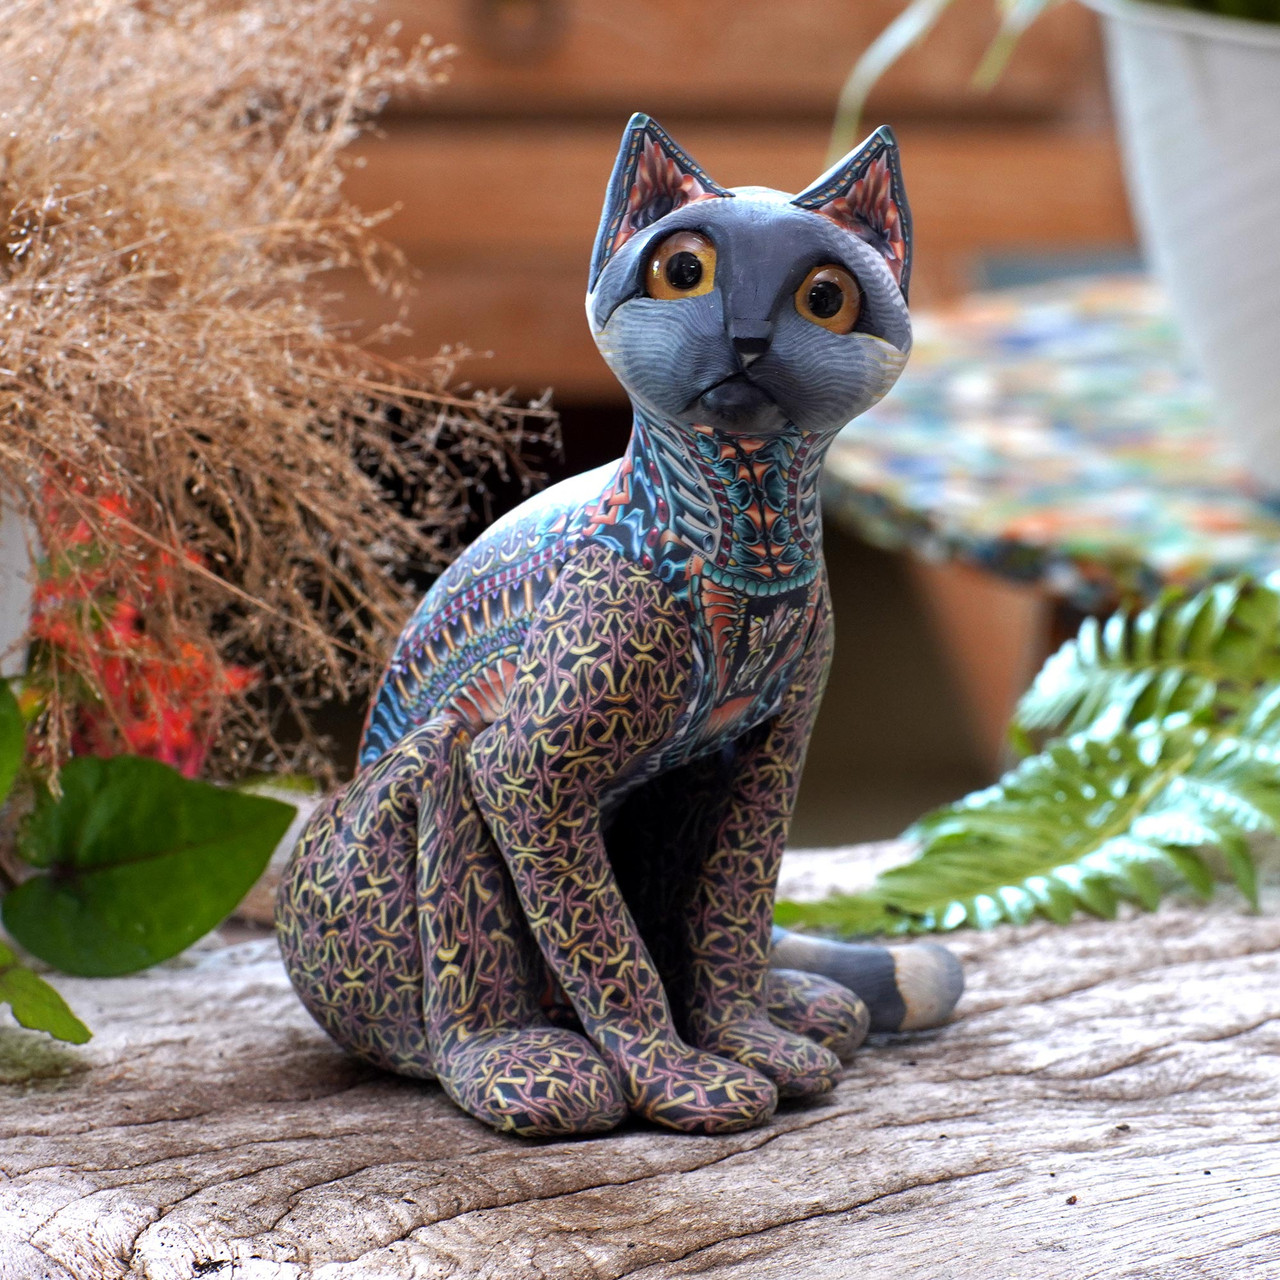 Art for kids: Cat sculpture from clay 